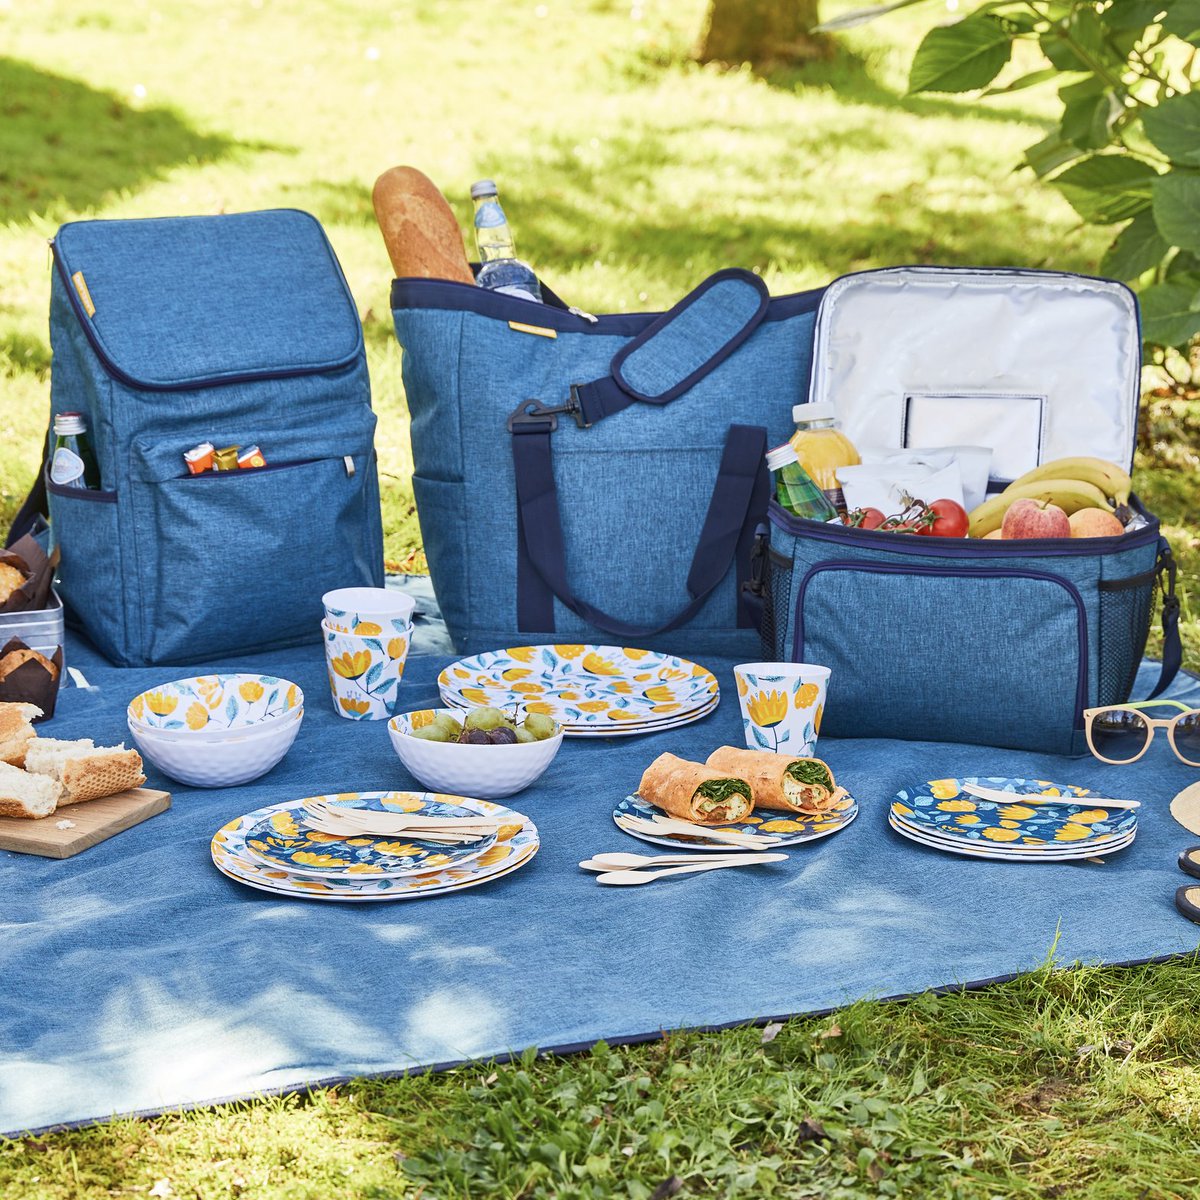 Fact – food tastes better outdoors especially when the sun is shining. And nothing says ‘Great British summer’ better than a picnic. So, to make the most of the summer days and picnics, we’ve put together all our picnic essentials☀️ Read more here - lakeland.co.uk/inspiration/pi…